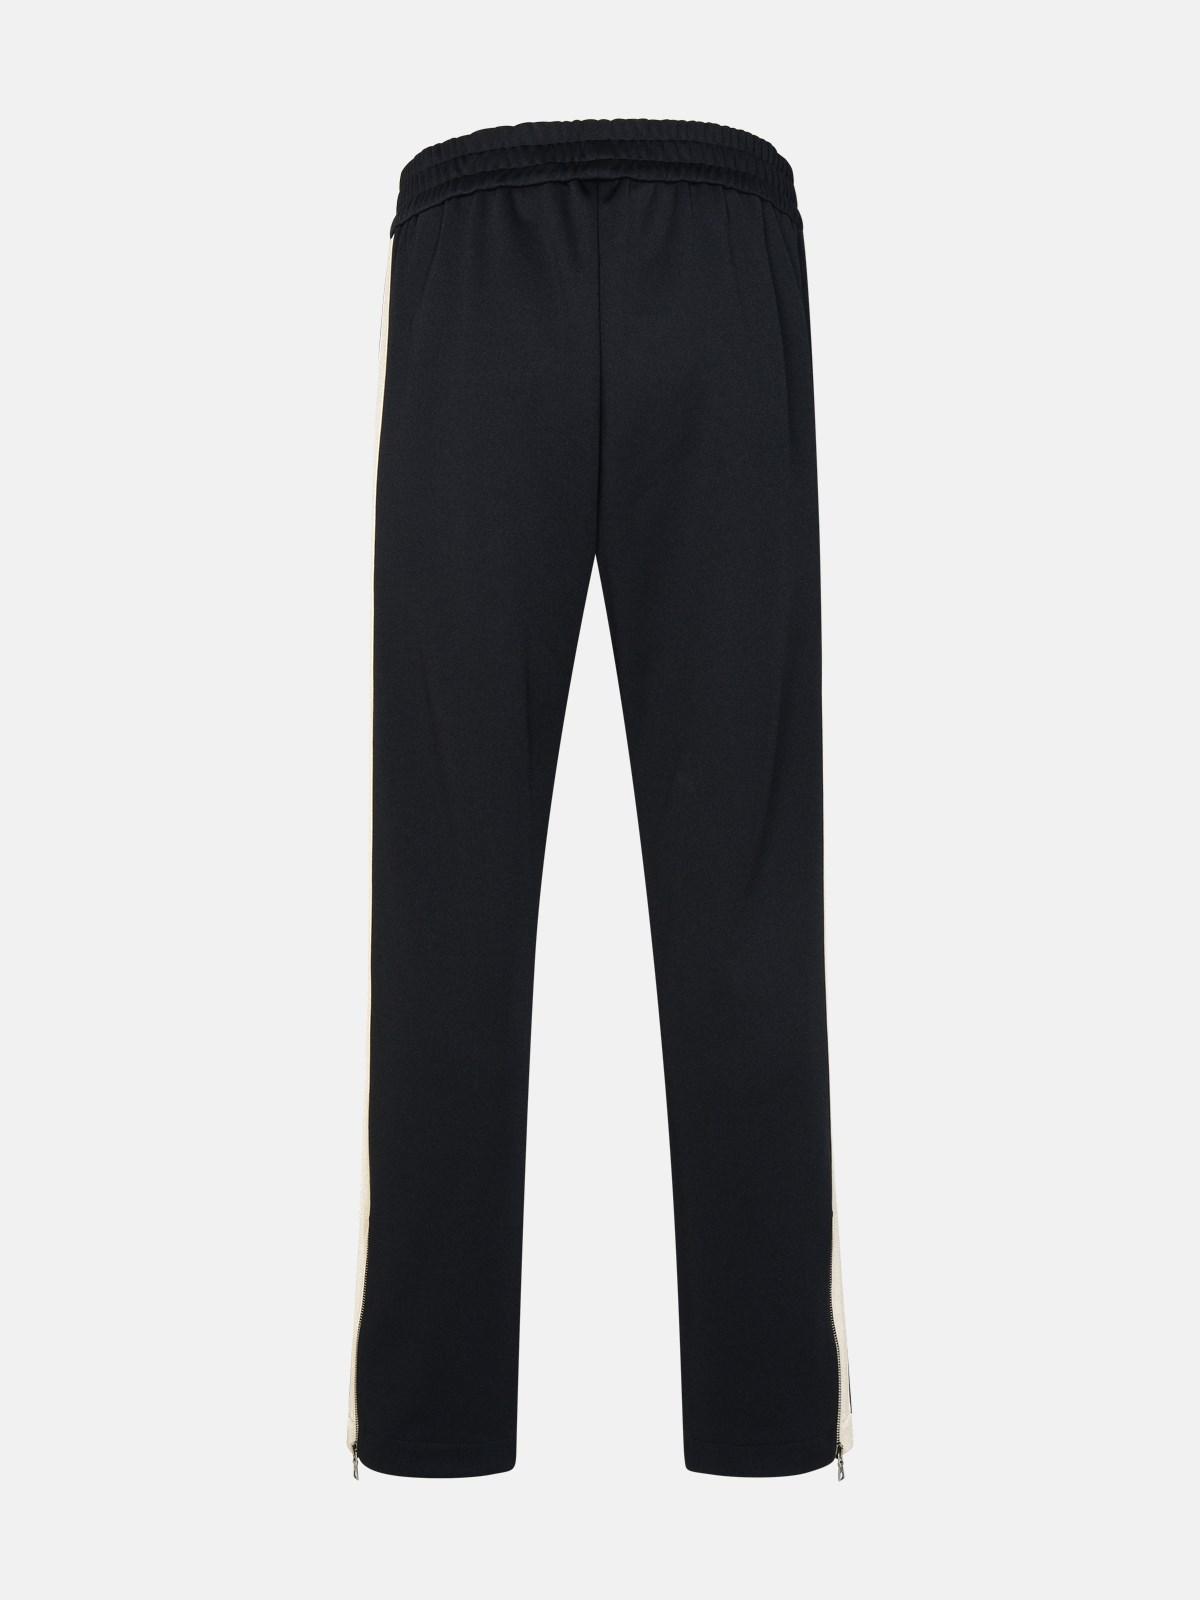 CHROES® Men's Polyester Loose Fit Track Pants/Jogger Pants Black :  Amazon.in: Clothing & Accessories